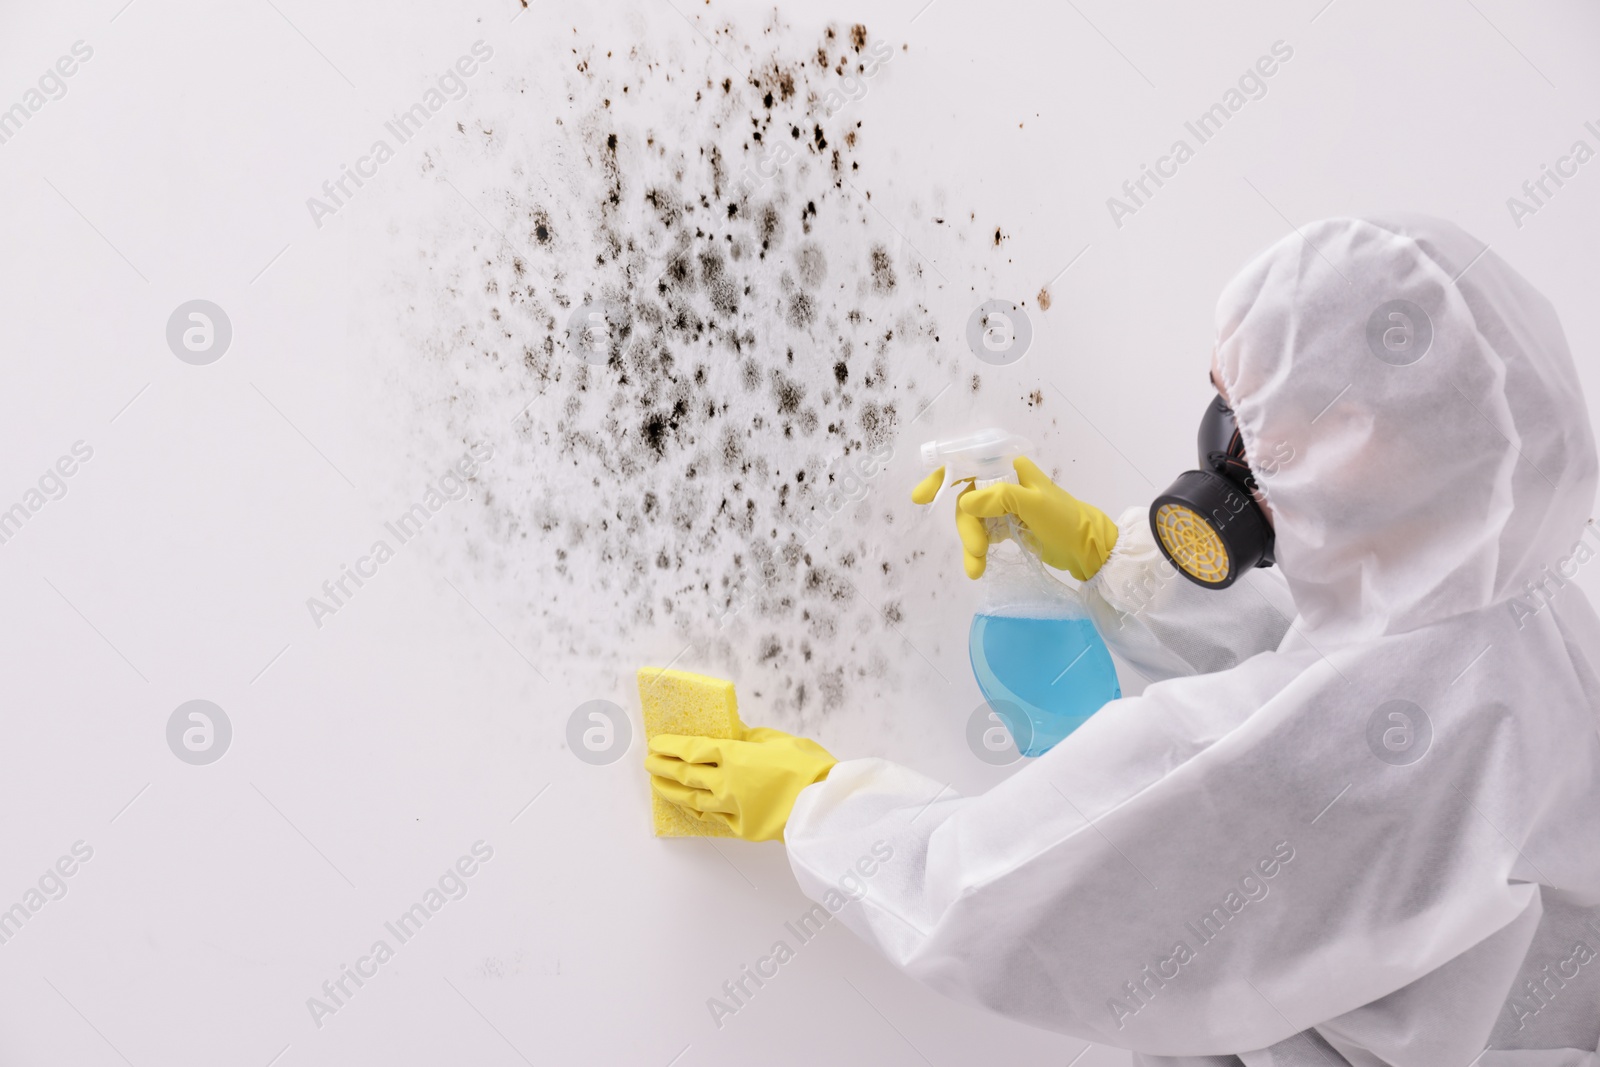 Image of Woman in protective suit and rubber gloves using mold remover and rag on wall